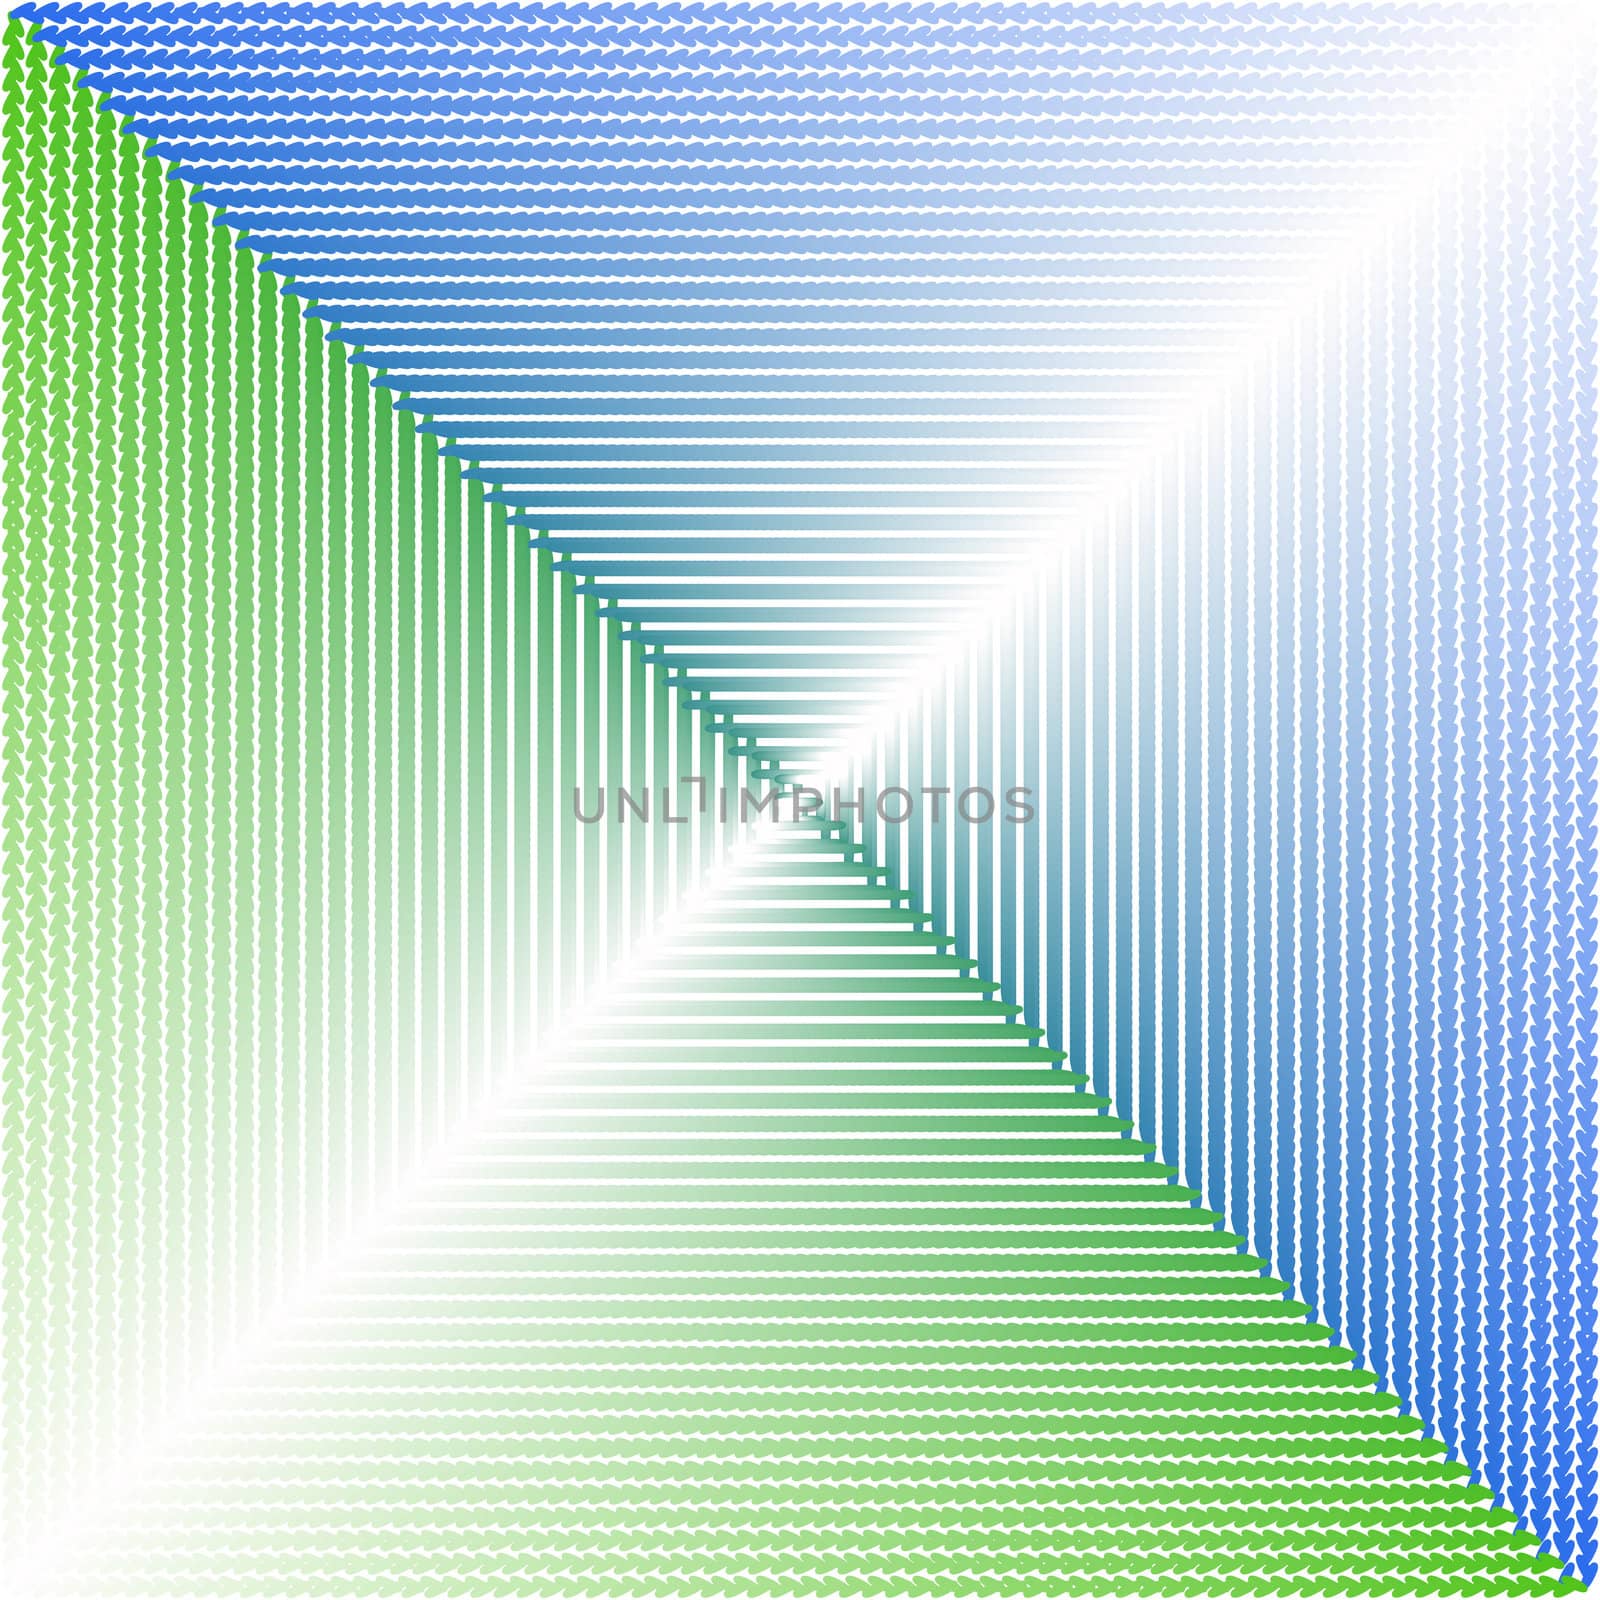 new abstract background with green and blue stripes can use like wallpaper  